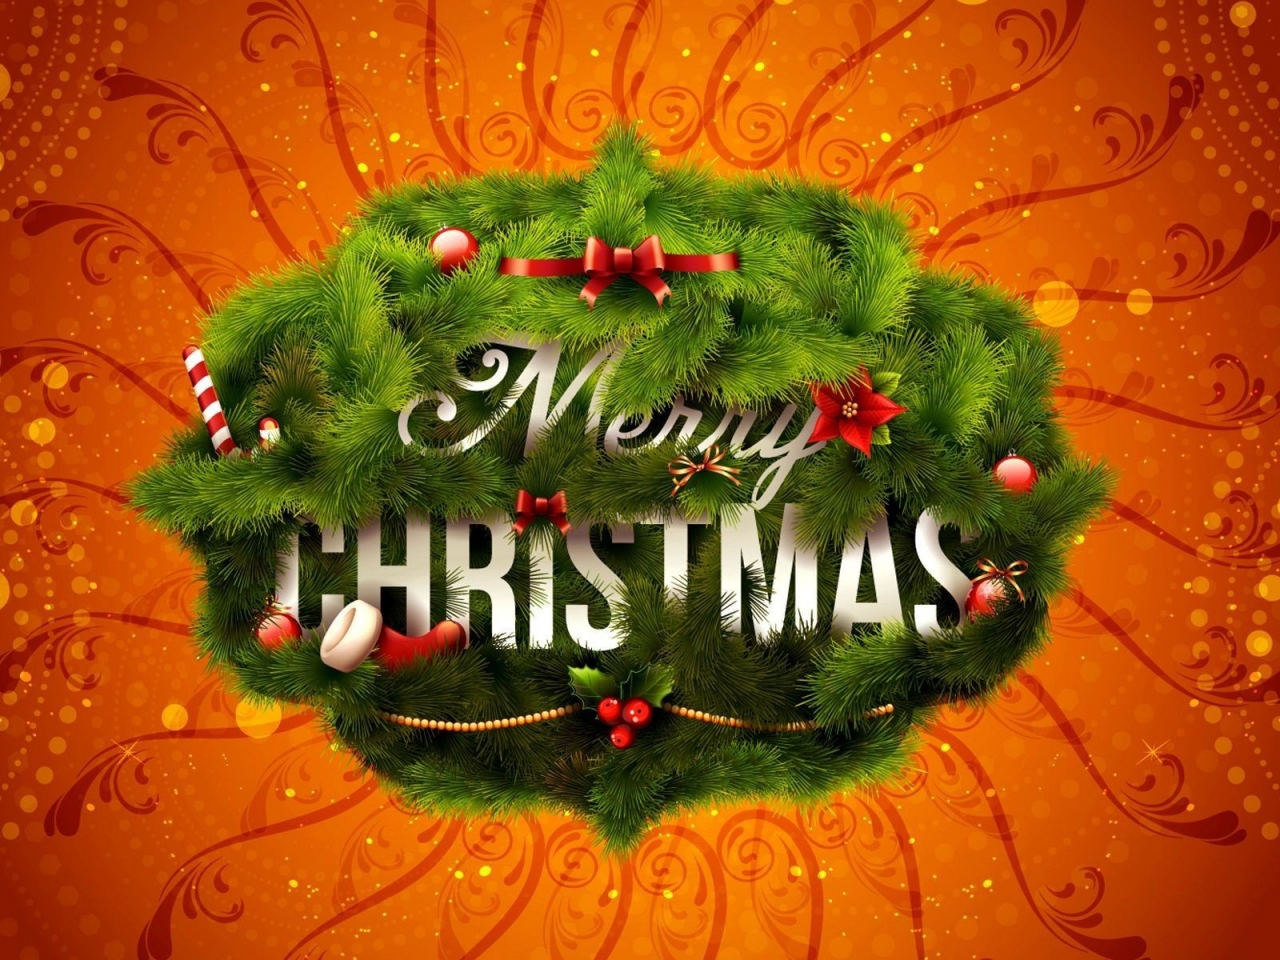 Merry Christmas Wreath for 1280 x 960 resolution